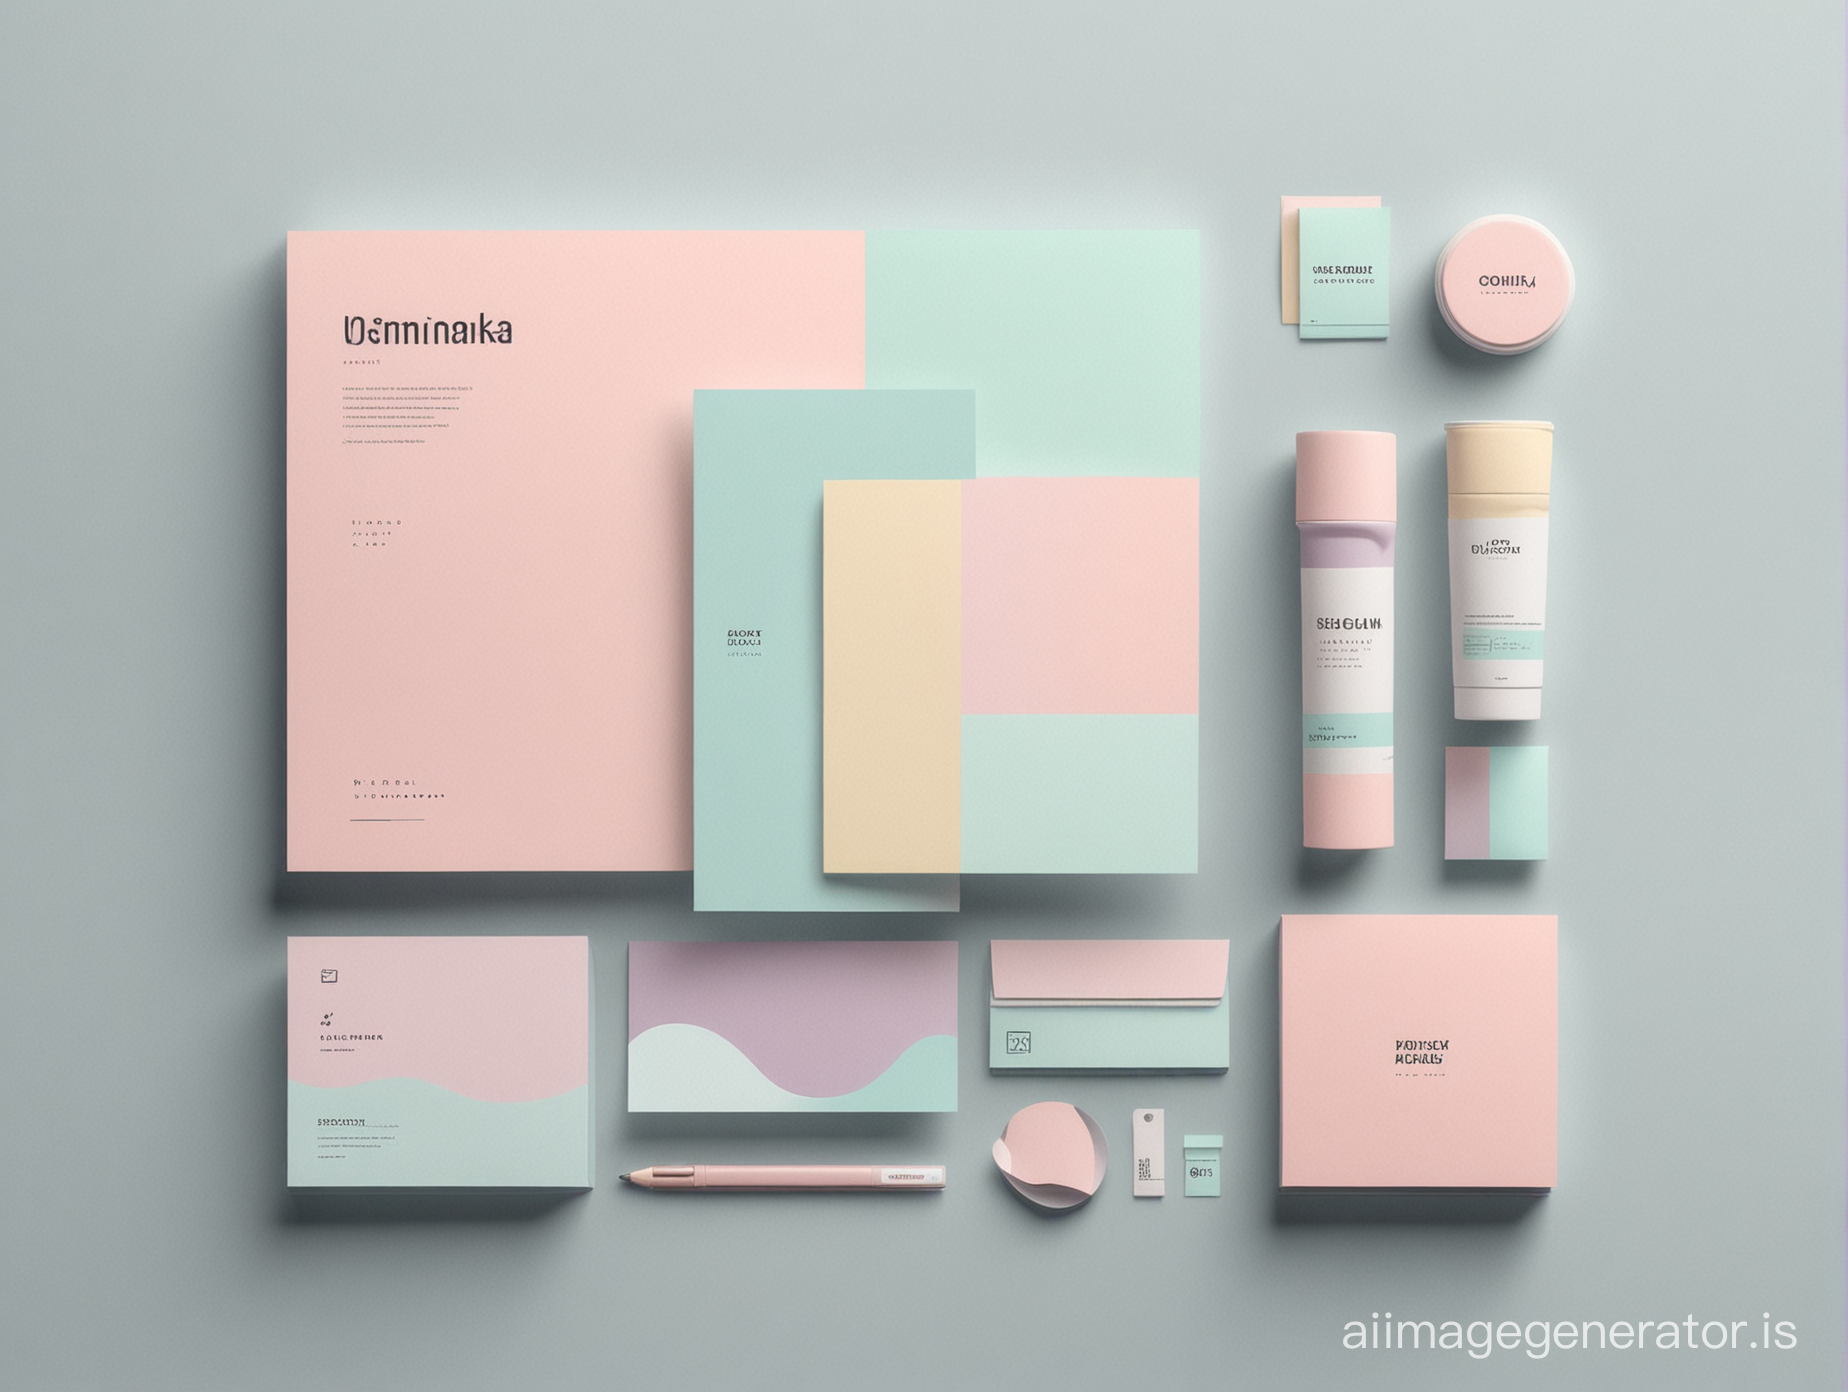 Design a series of mock-ups showcasing your skills in graphic design, web development, or other relevant fields.
pastel colors